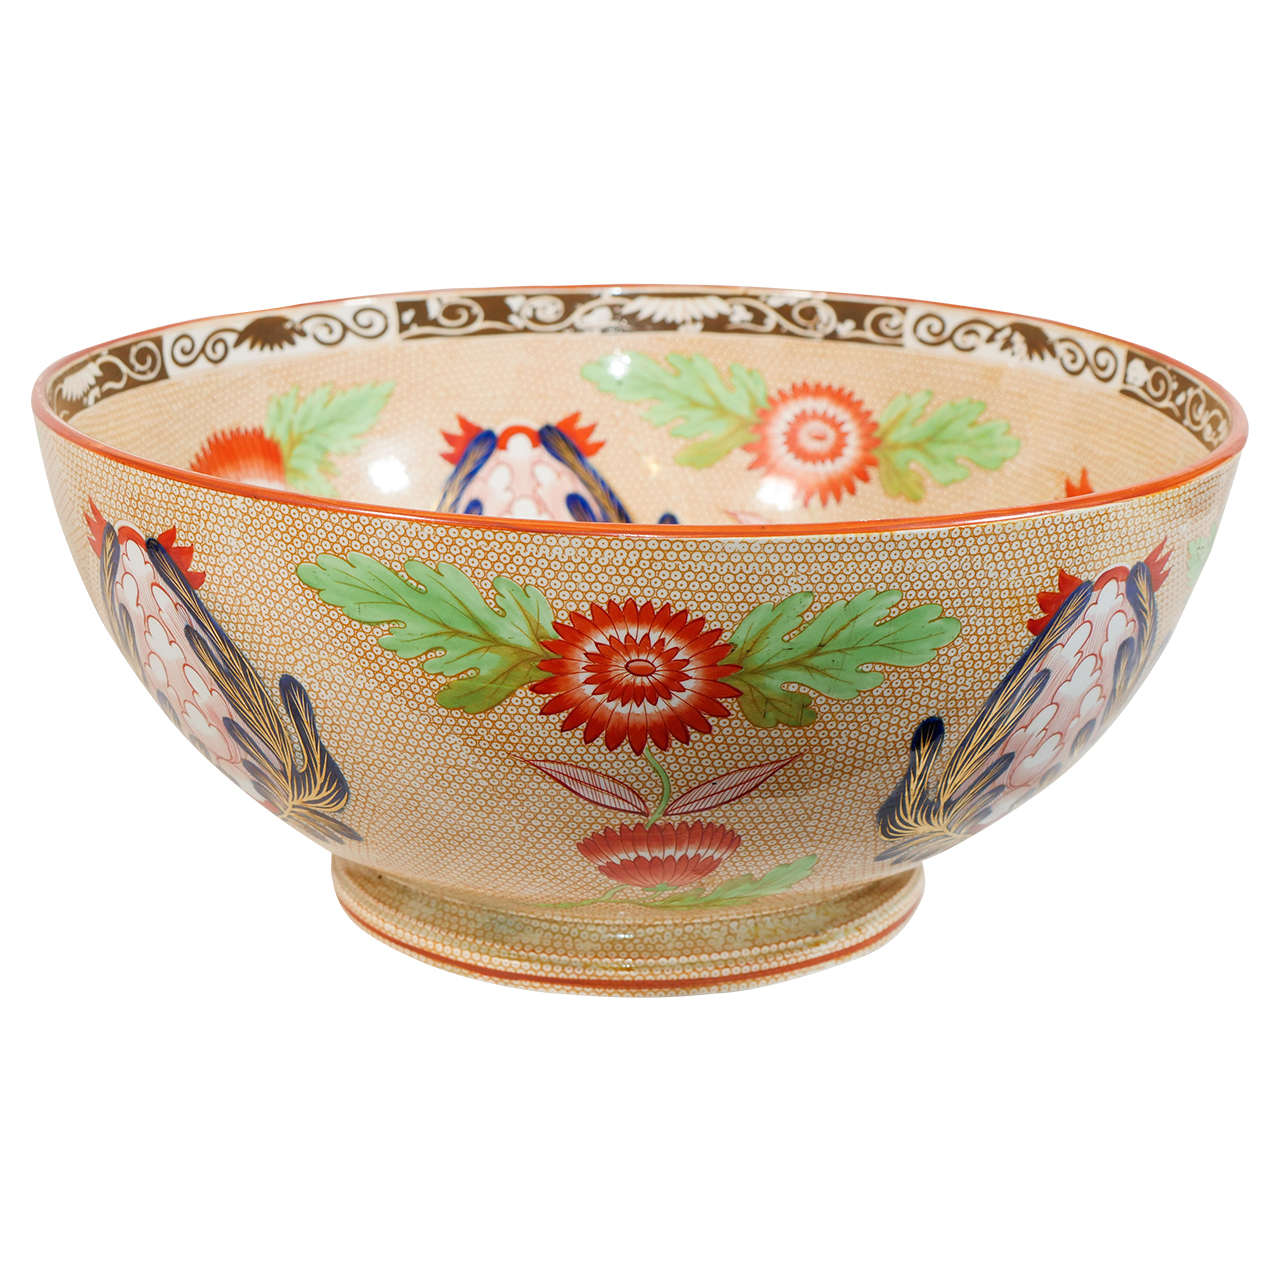 A Large Wedgwood Punch Bowl in the "Chrysanthemum" Pattern